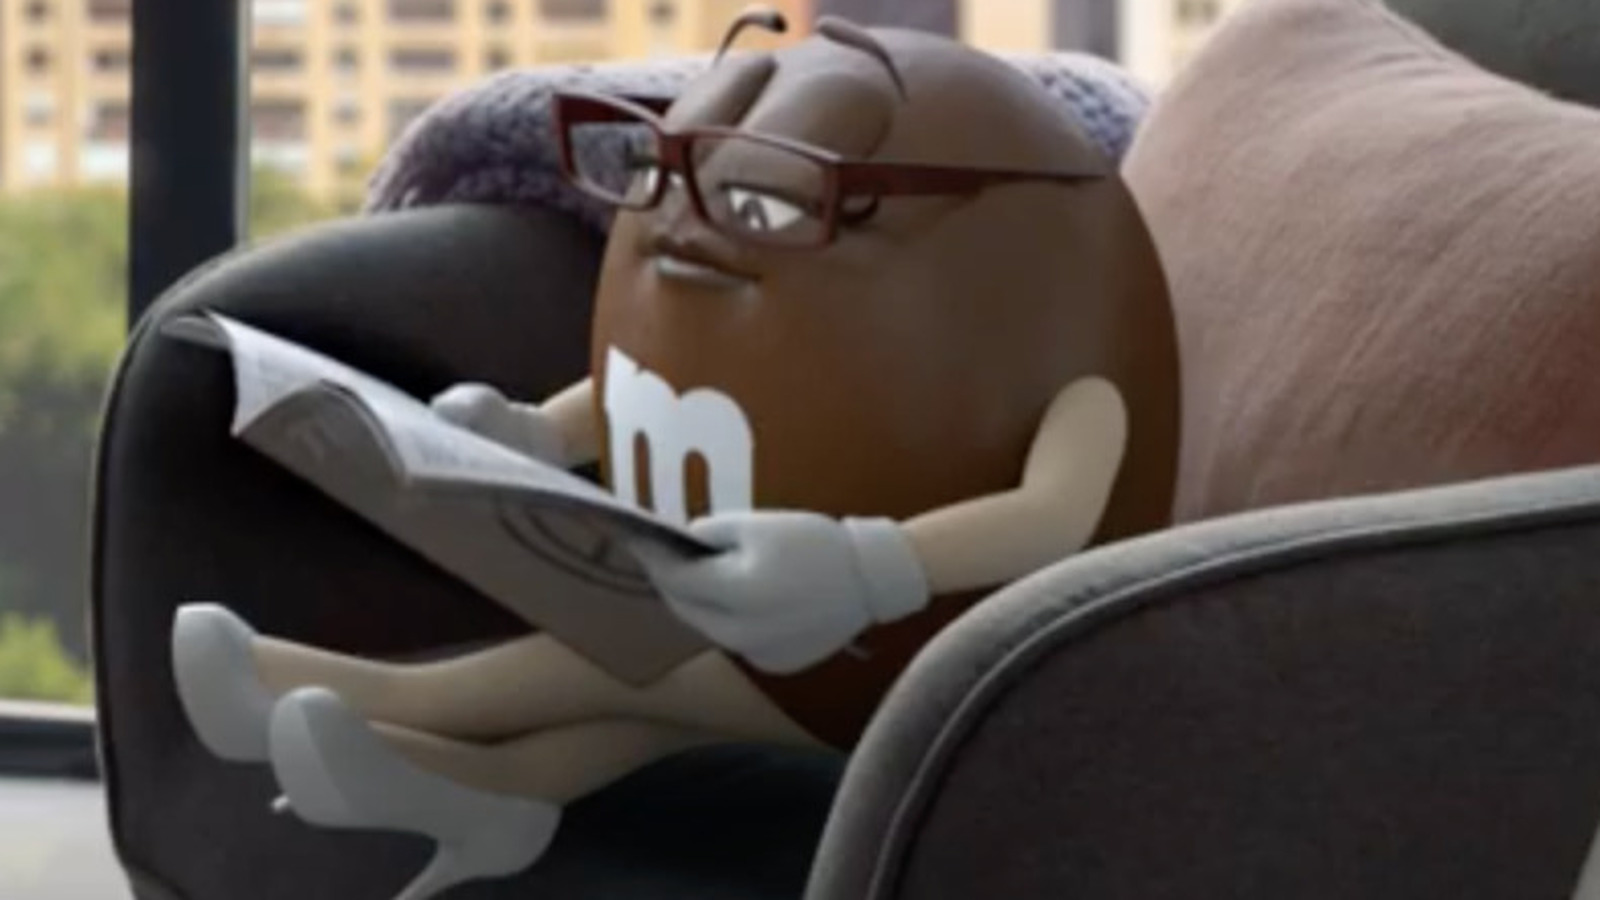 Fudge brownie M&M's commercial but it's reversed. 